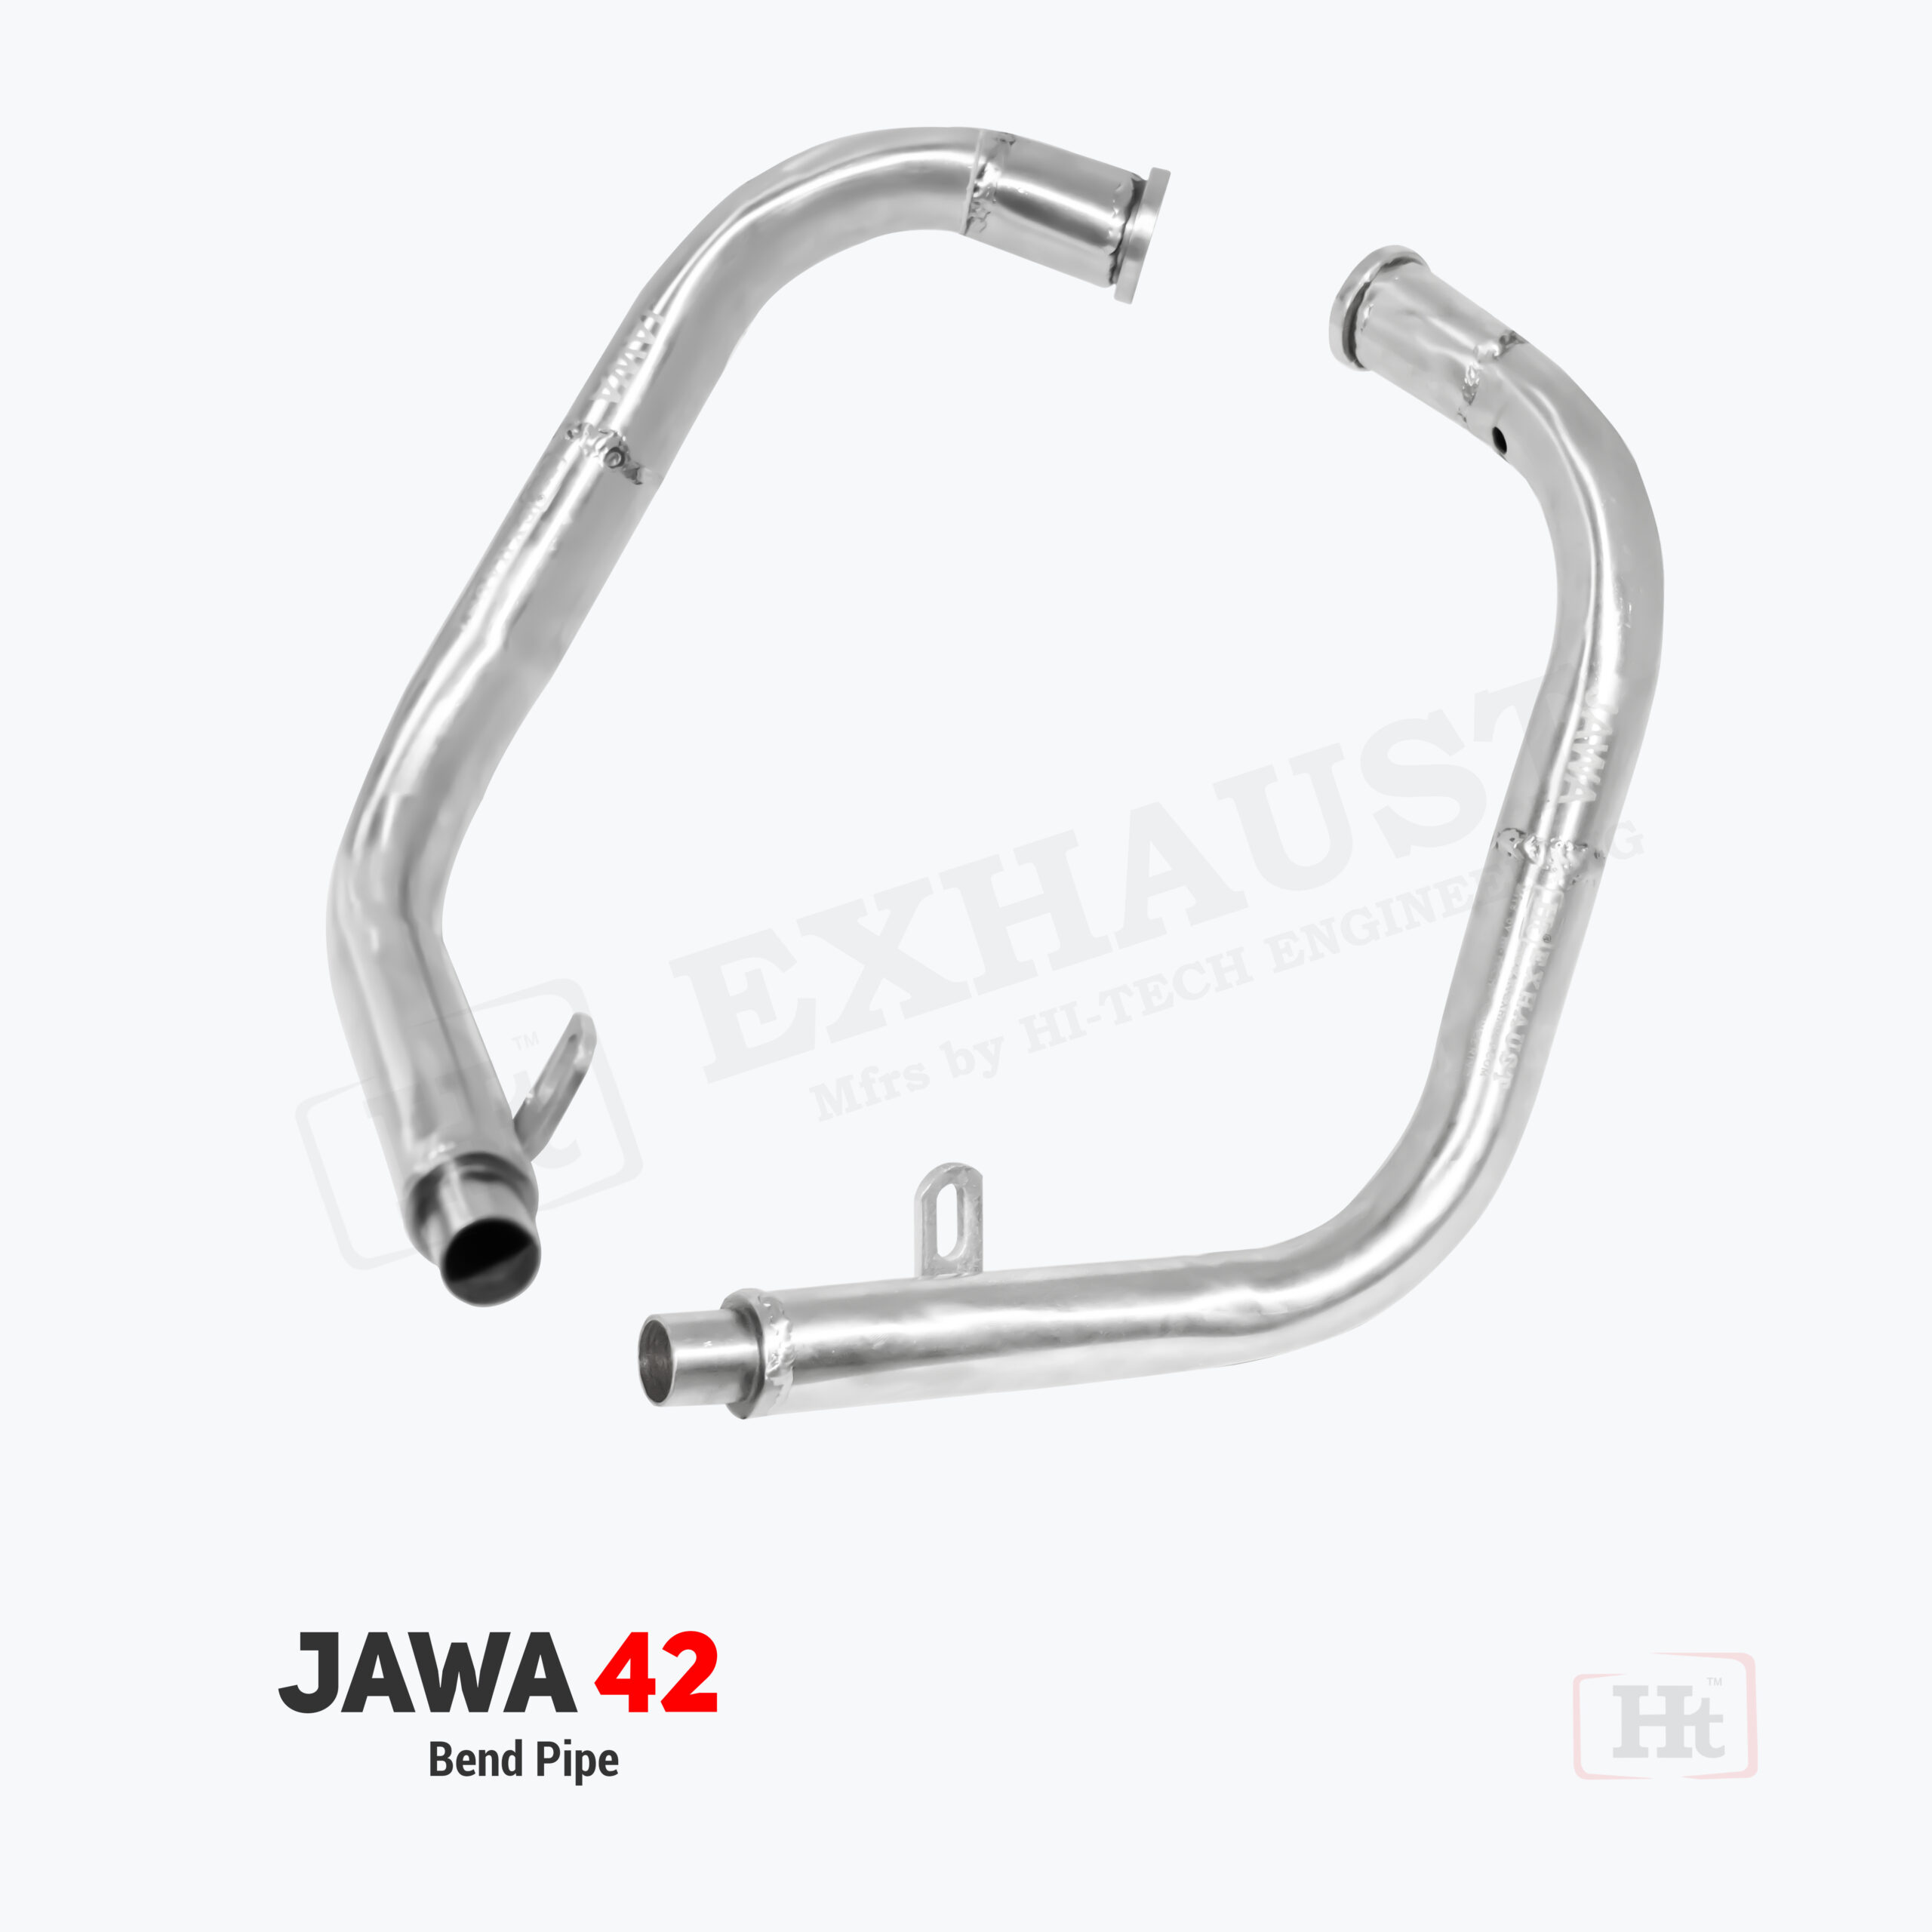 https://htexhaust.com/wp-content/uploads/2021/07/Jawa-42-Bend-pipe-1-scaled.jpg